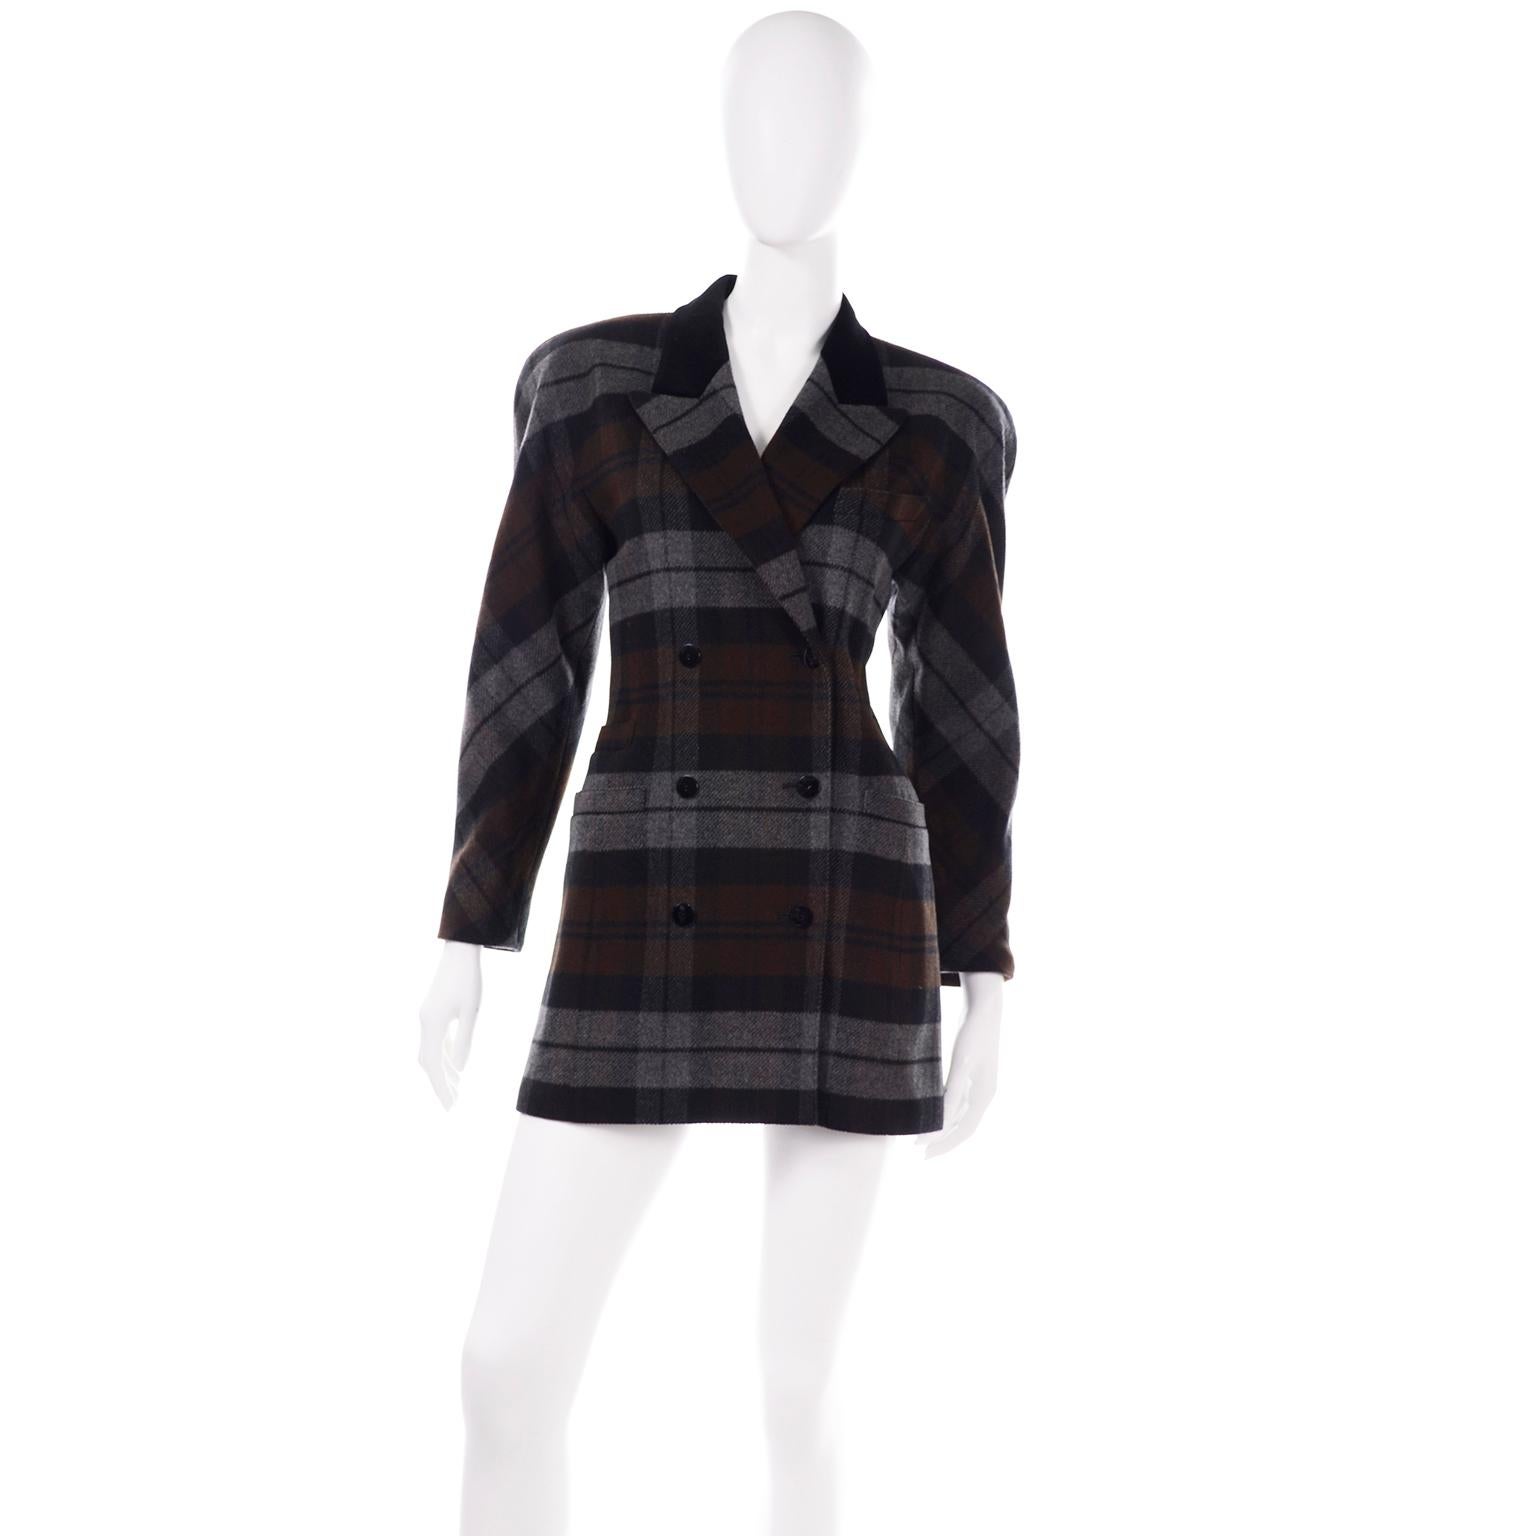 Escada by Margaretha Ley jackets will always be a staple in our collection. We really  love this incredible vintage 1980's double breasted grey and brown plaid wool blazer. The colors are charcoal, grey, black, and chocolate brown. This is a long